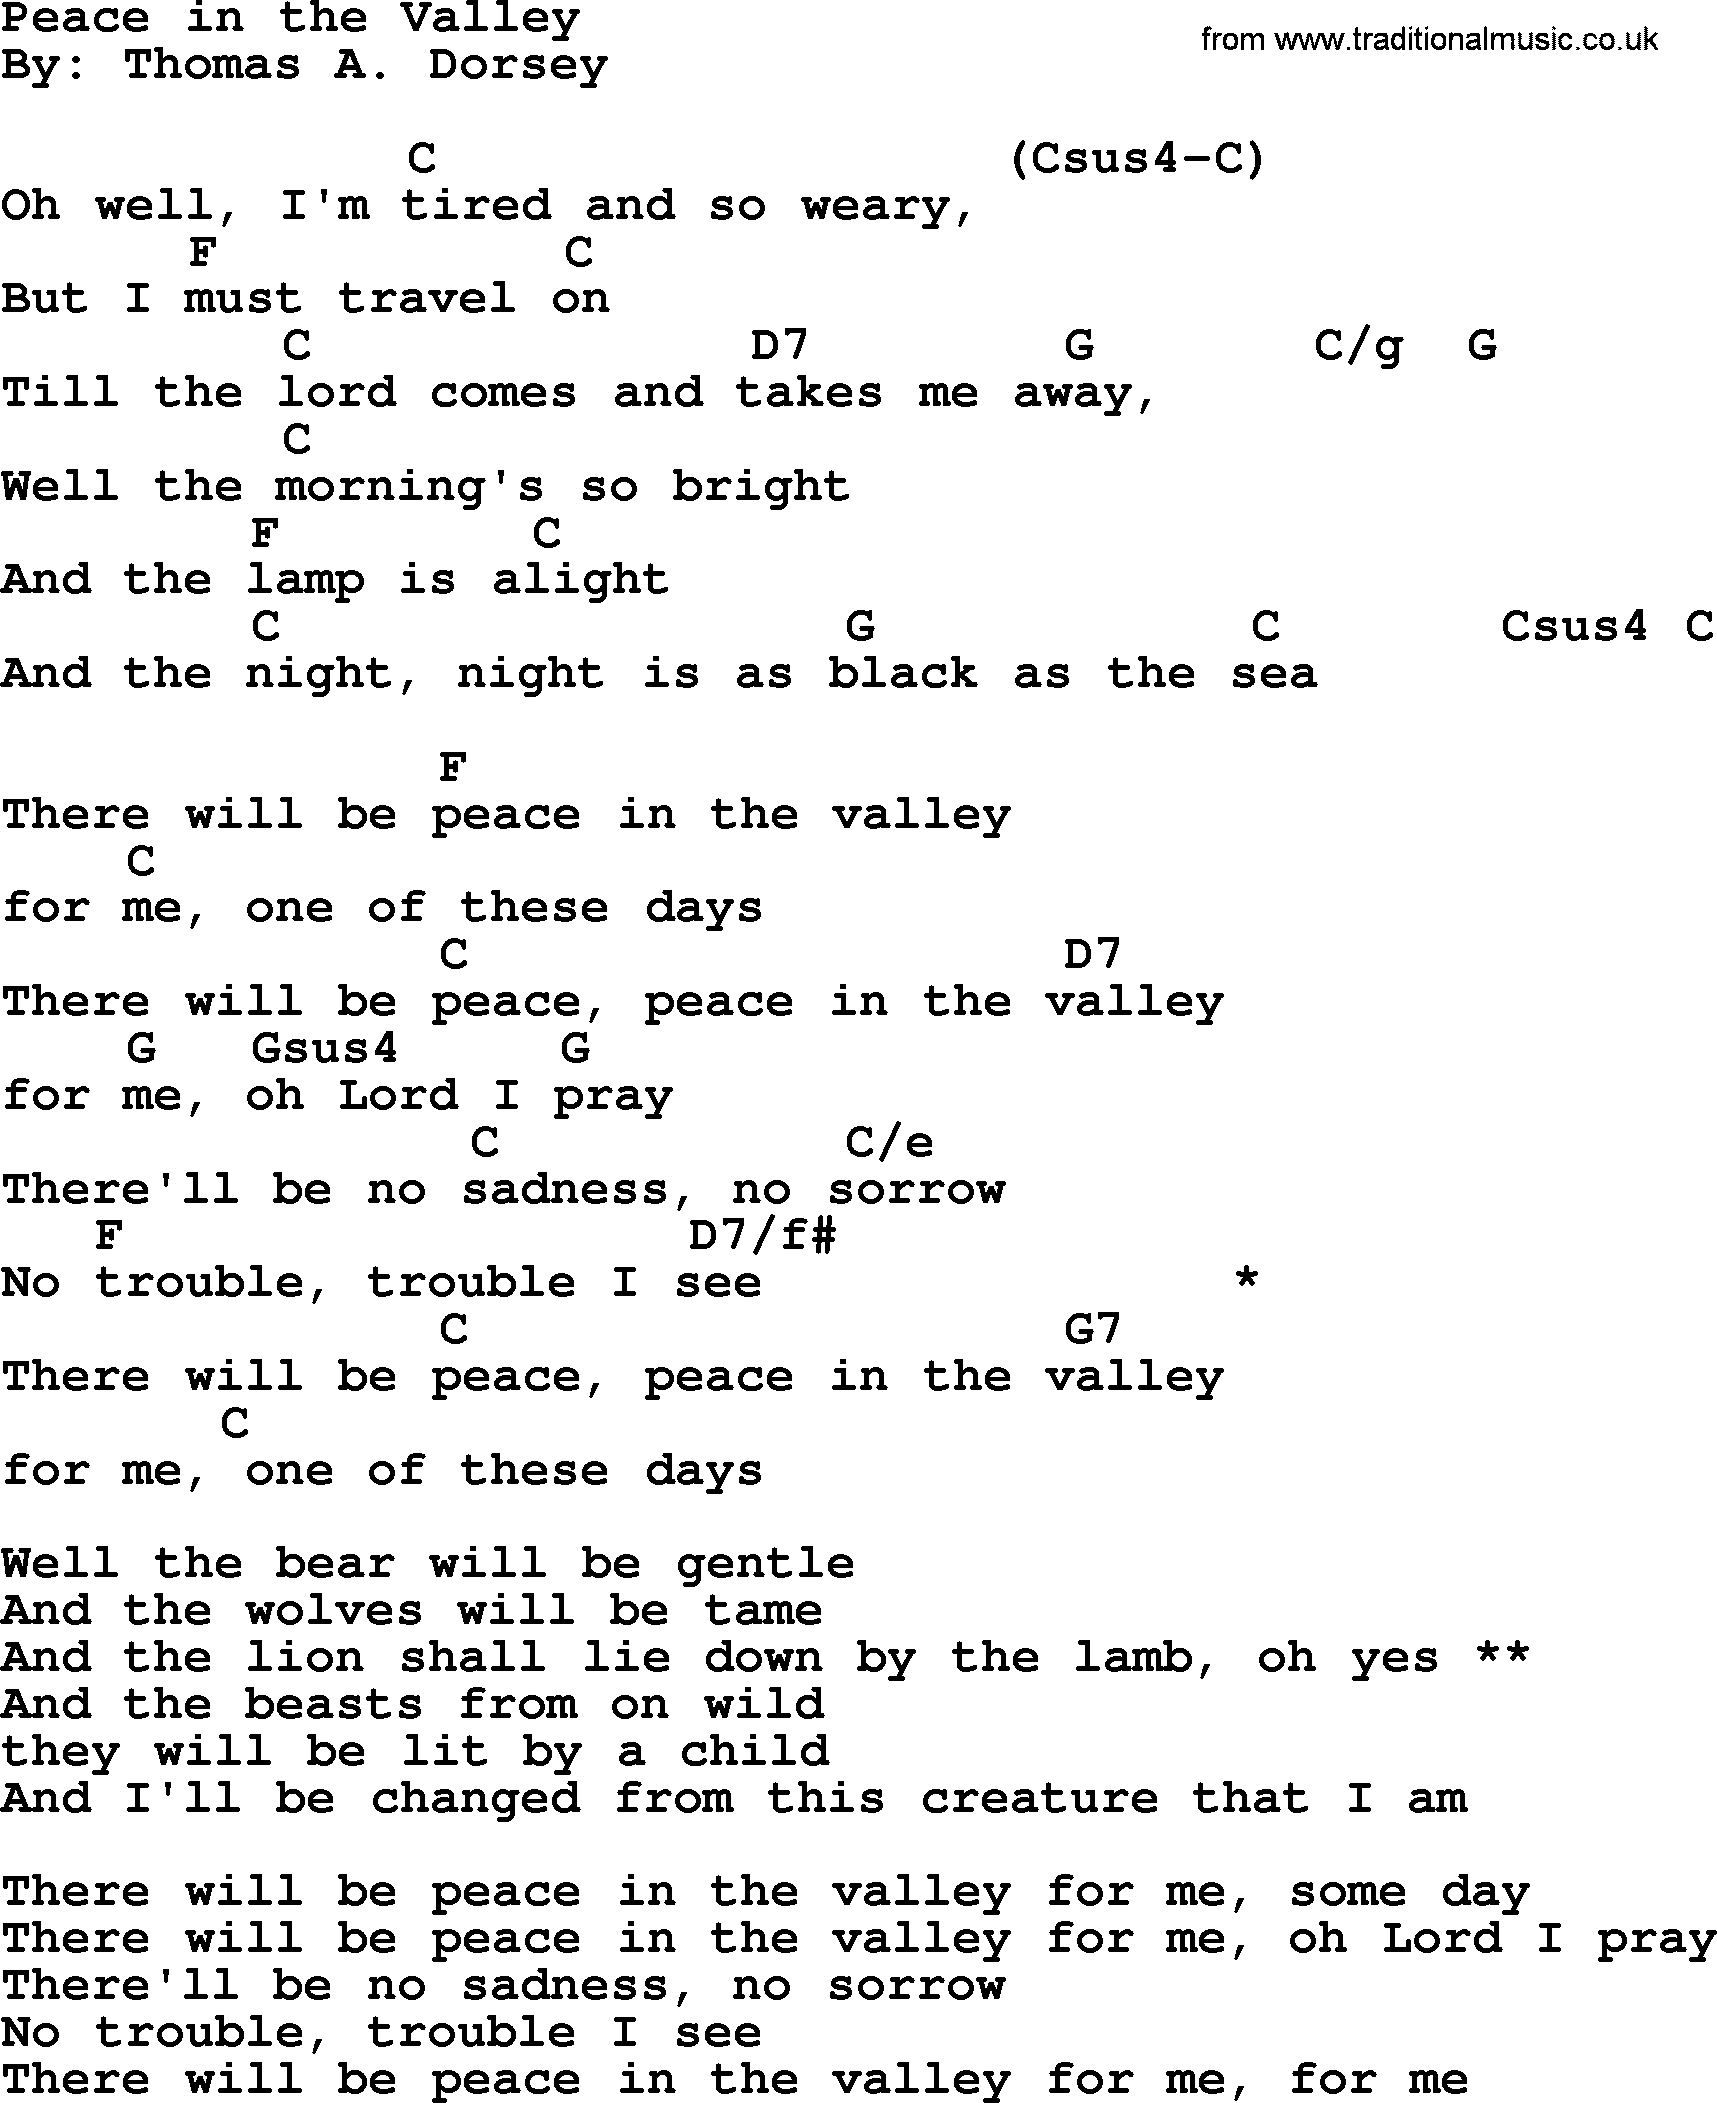 Bob Dylan song - Peace in the Valley, lyrics and chords